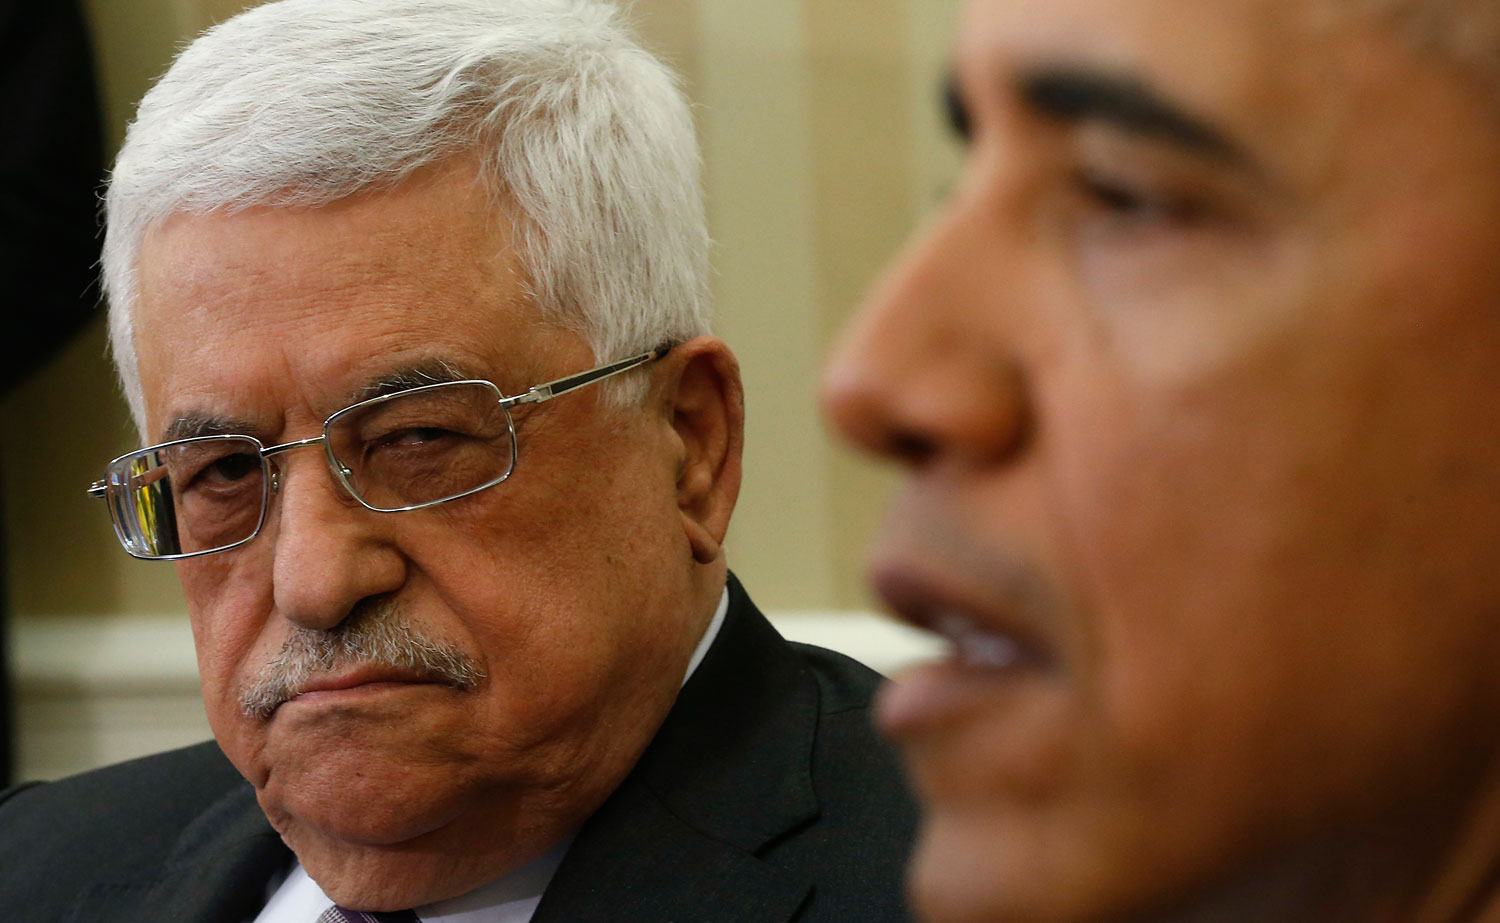 Palestinian Authority President Mahmoud Abbas meeting President Obama at the White House, March 17, 2014. (Kevin Lamarque—Reuters)